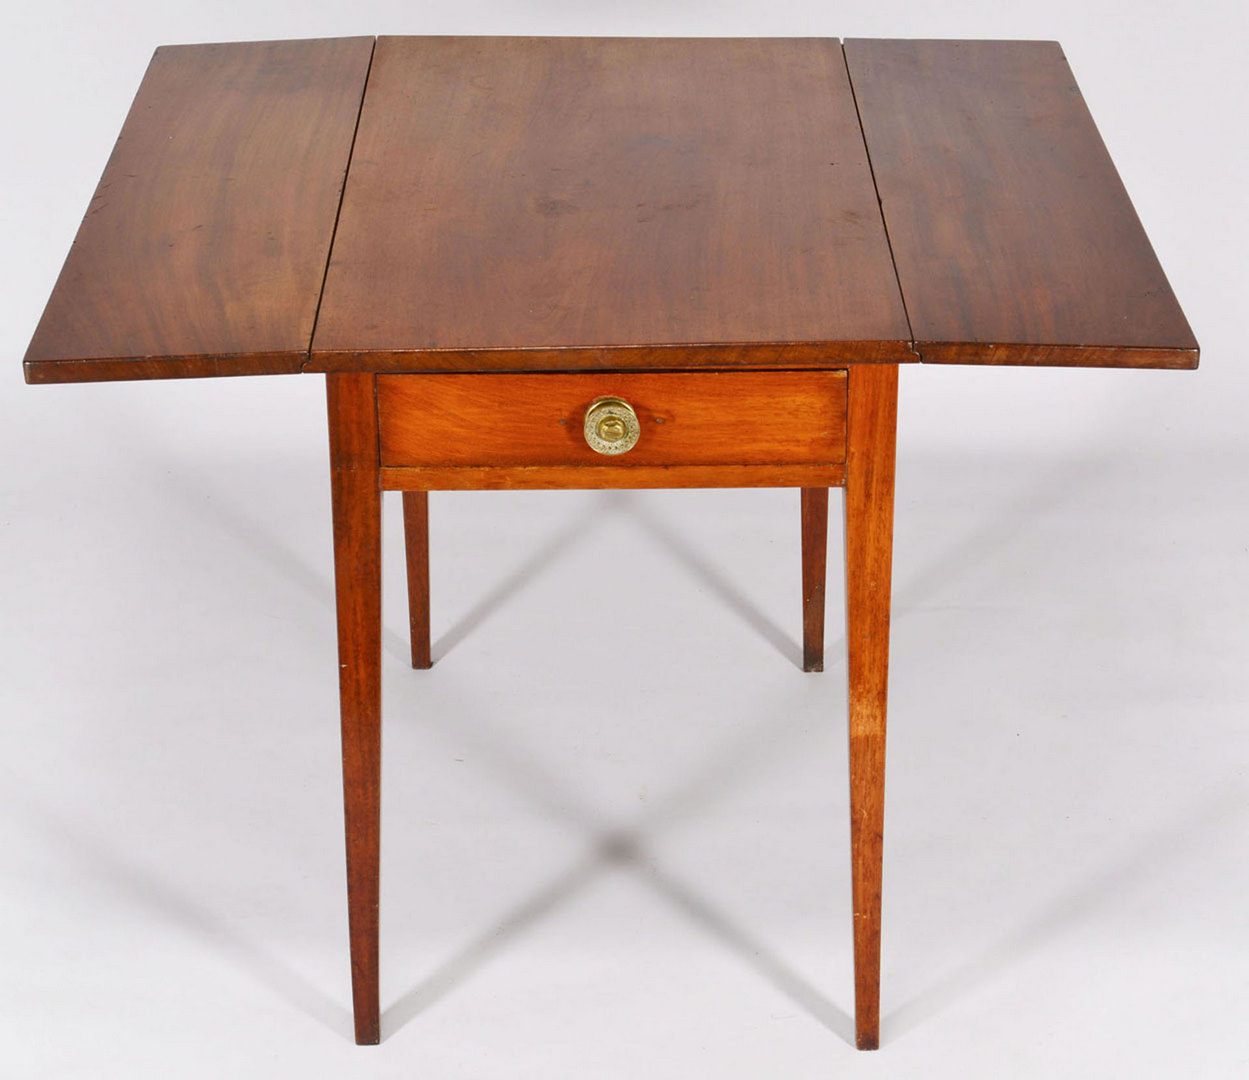 Lot 259: Pembroke Table with drawer, probably Midatlantic